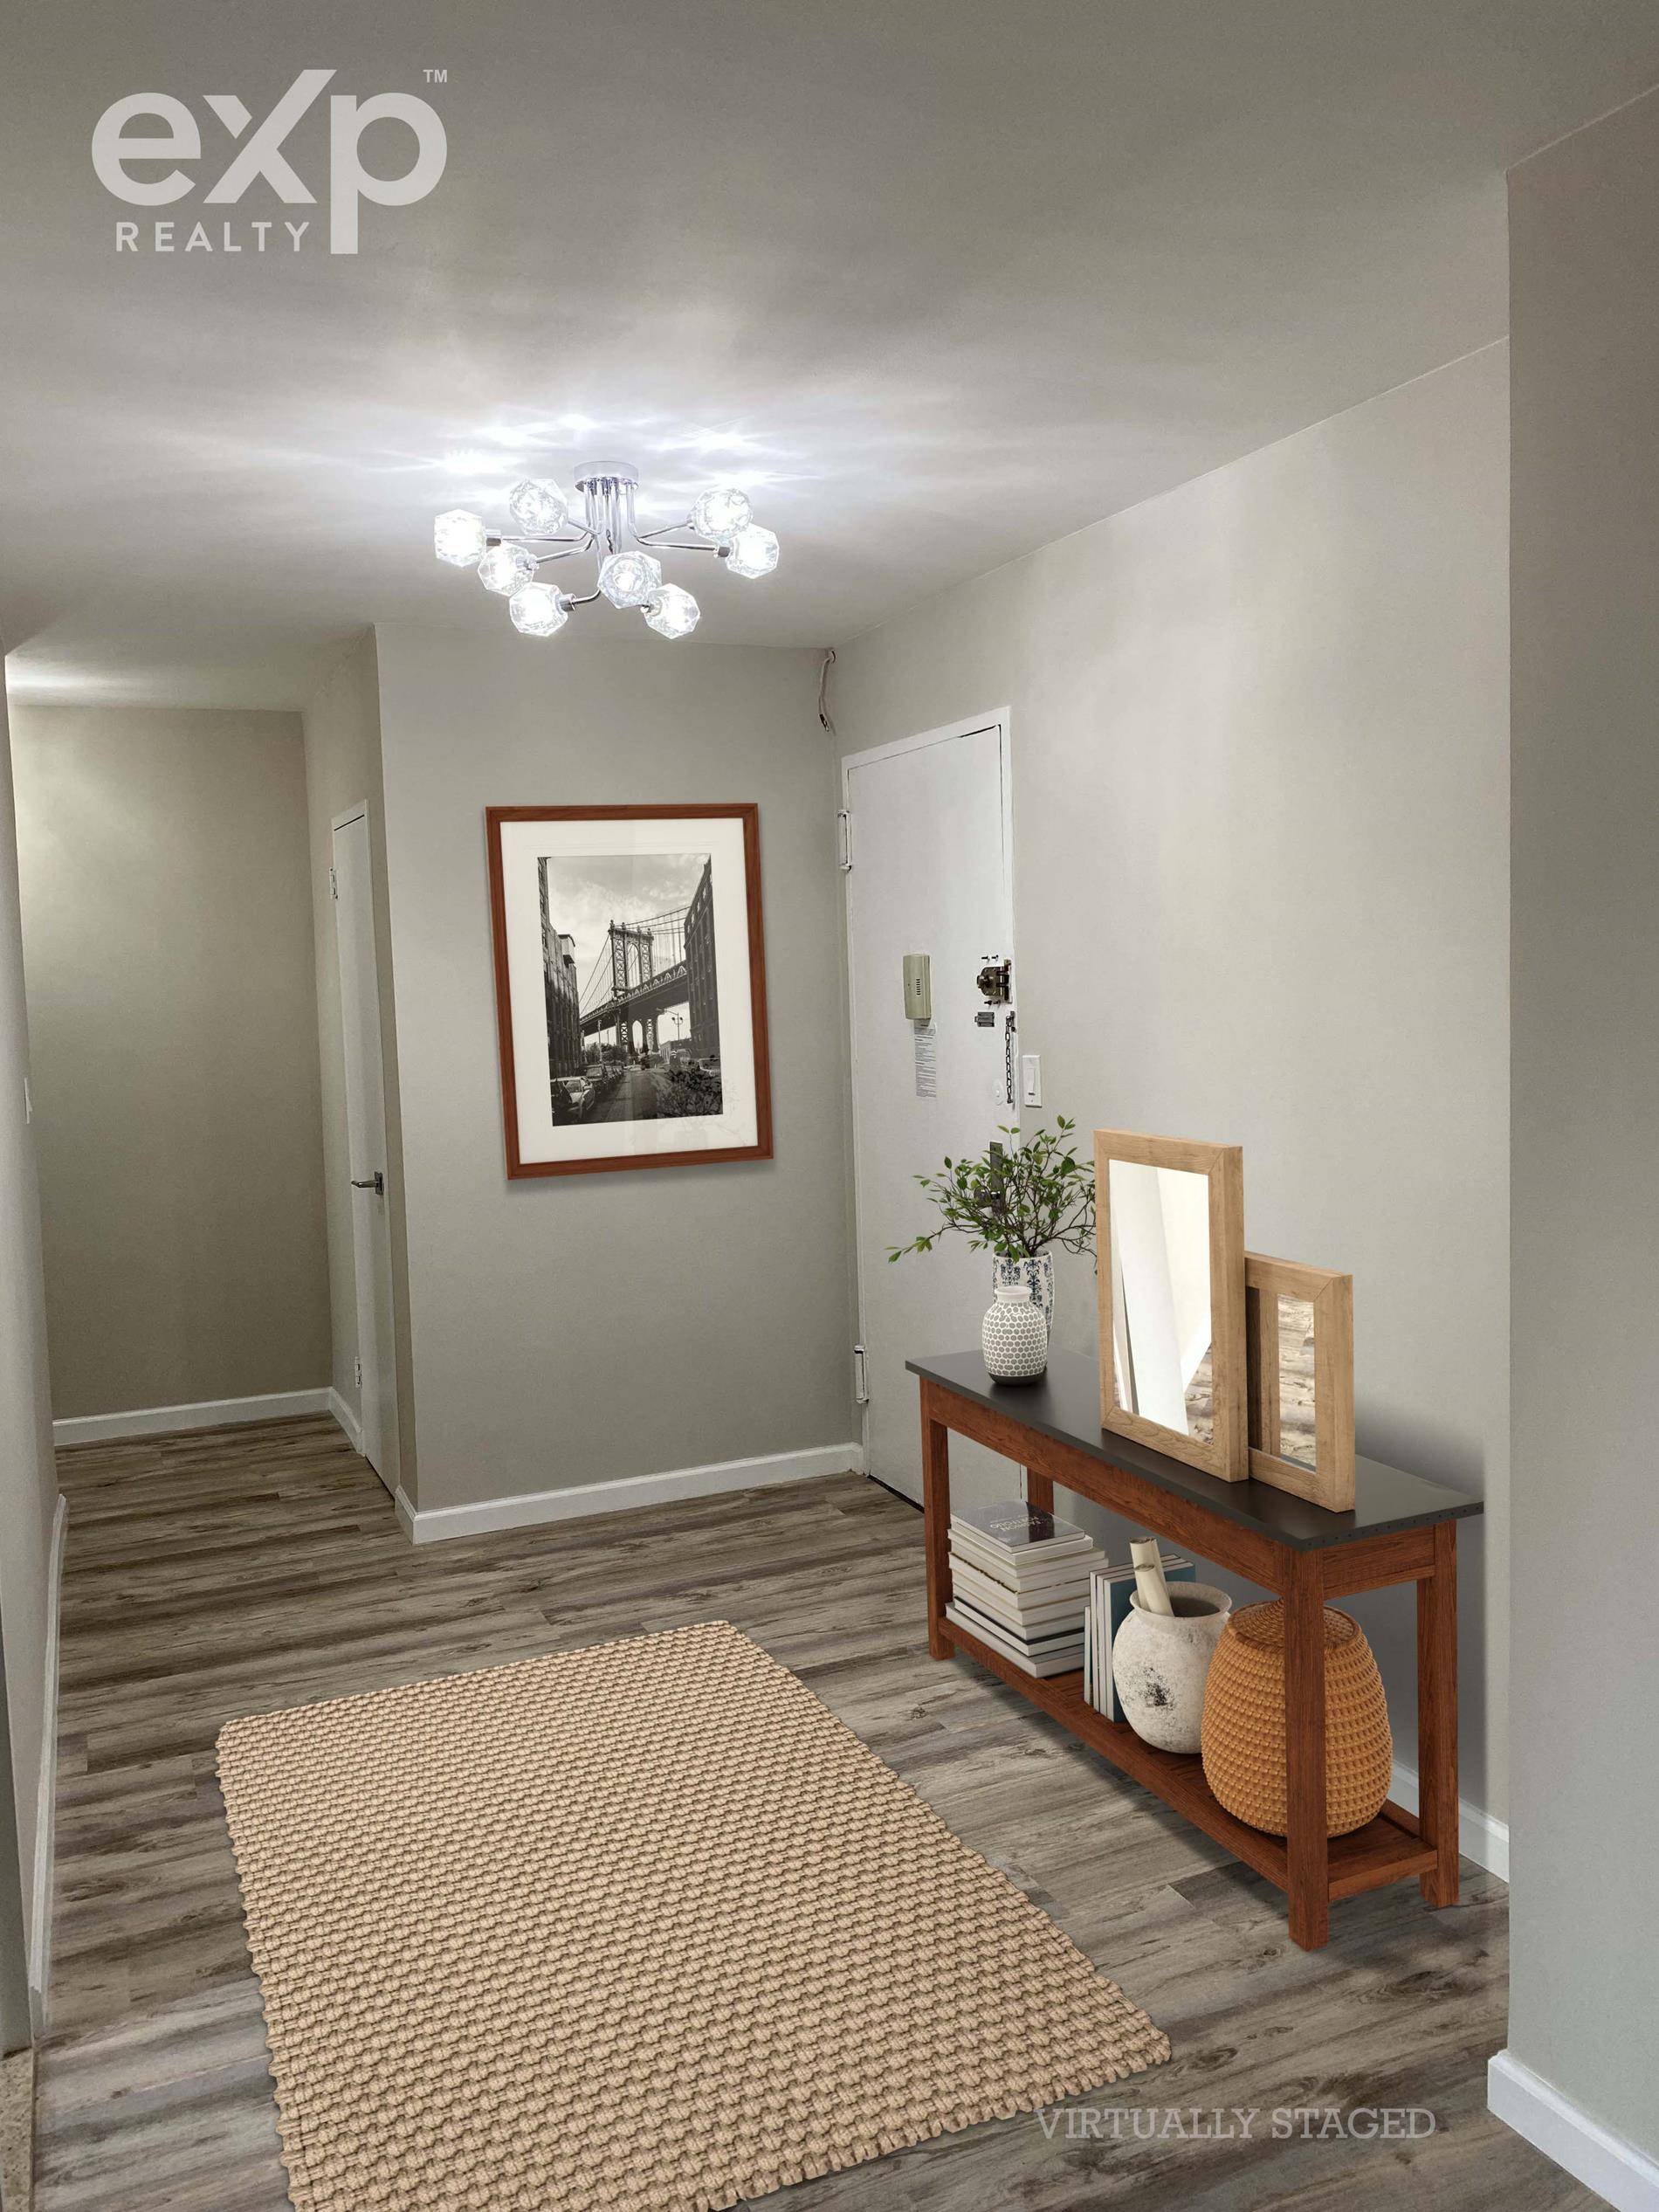 DOWNTOWN BROOKLYN APT w PARKING This beautifully renovated one bedroom and one full bathroom top floor cooperative apartment is waiting for you to call it home.